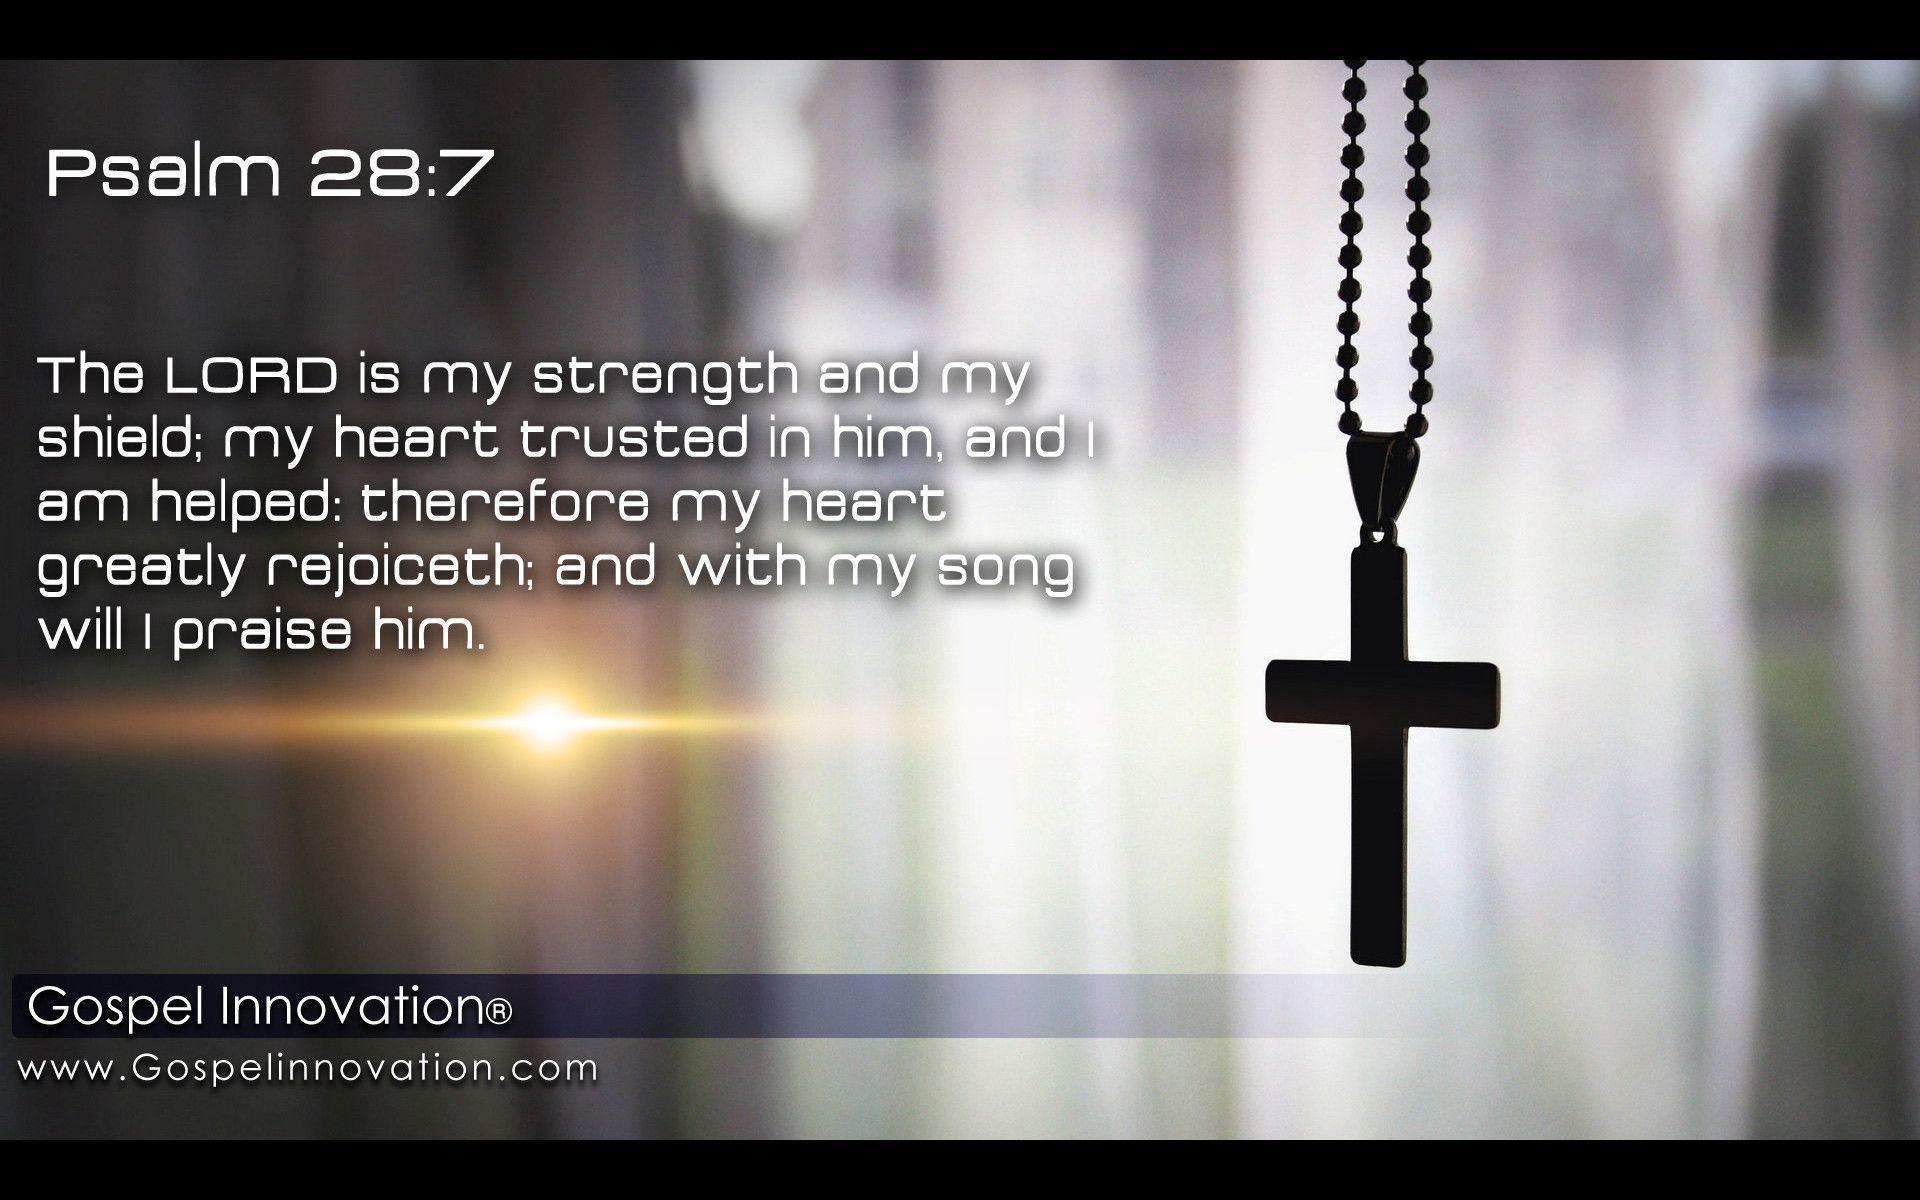 Take a look at the Psalms 28 Gospel Wallpaper! Share this on your